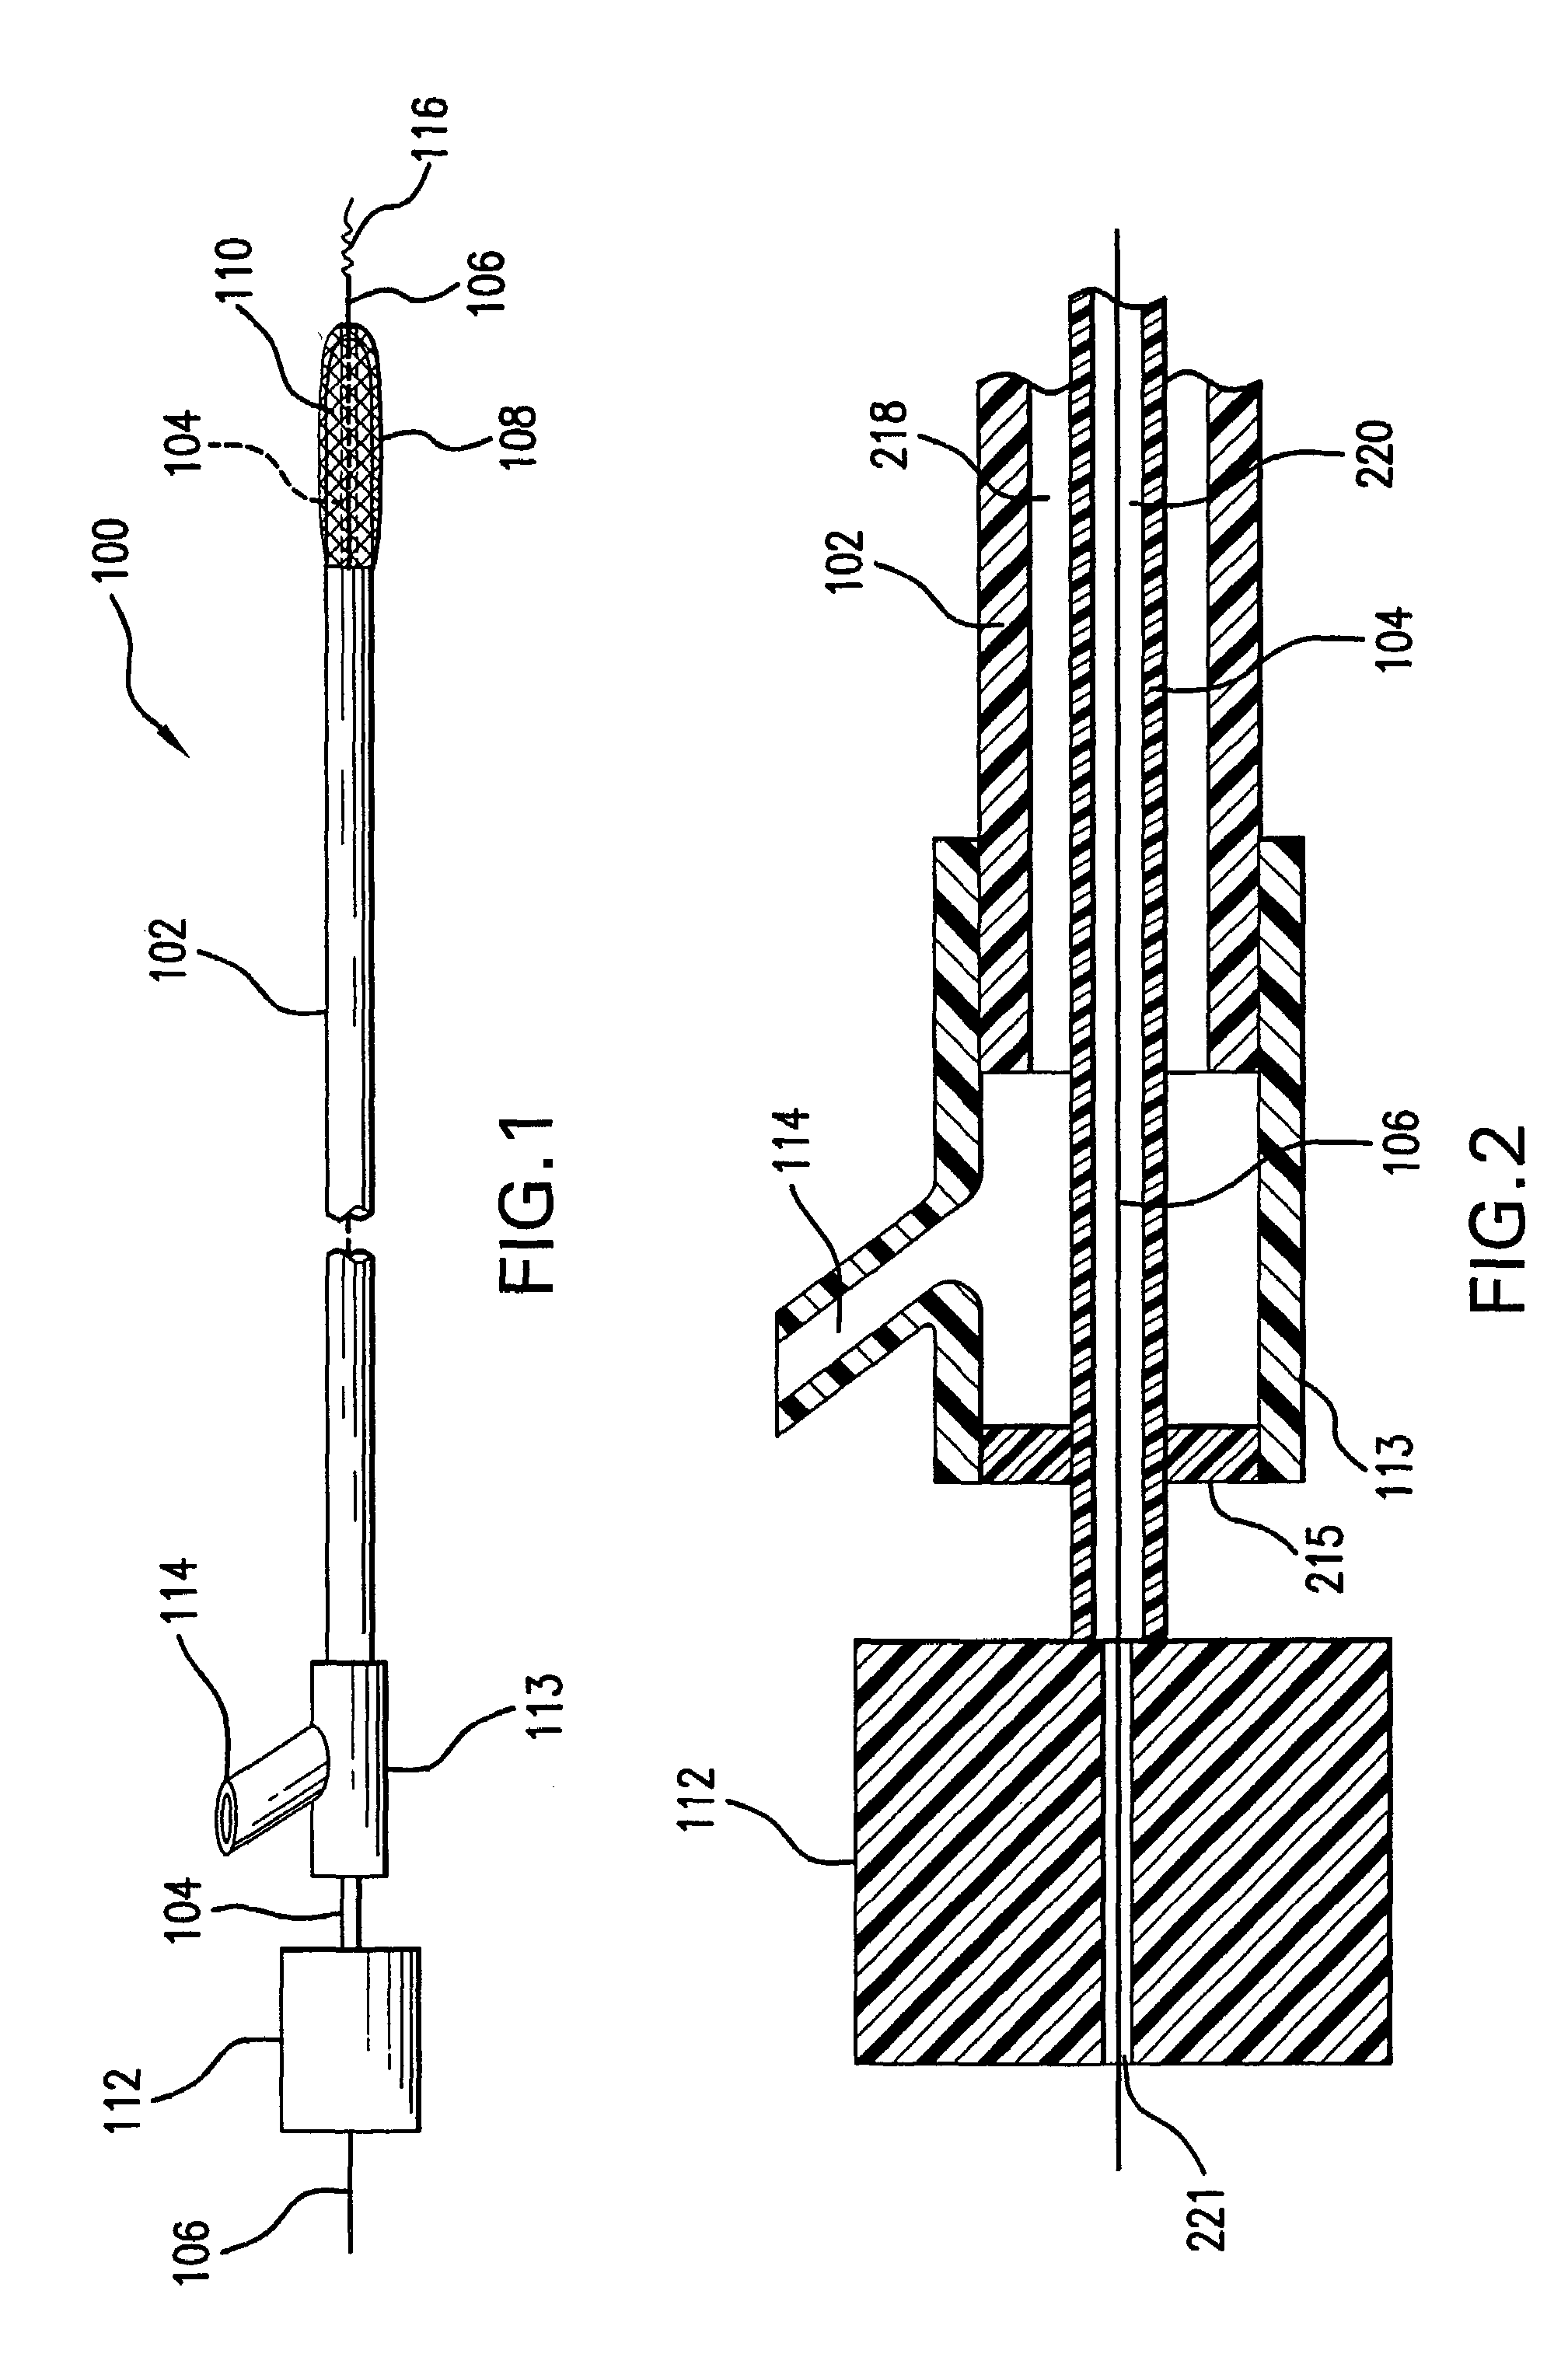 Distal protection device for filtering and occlusion